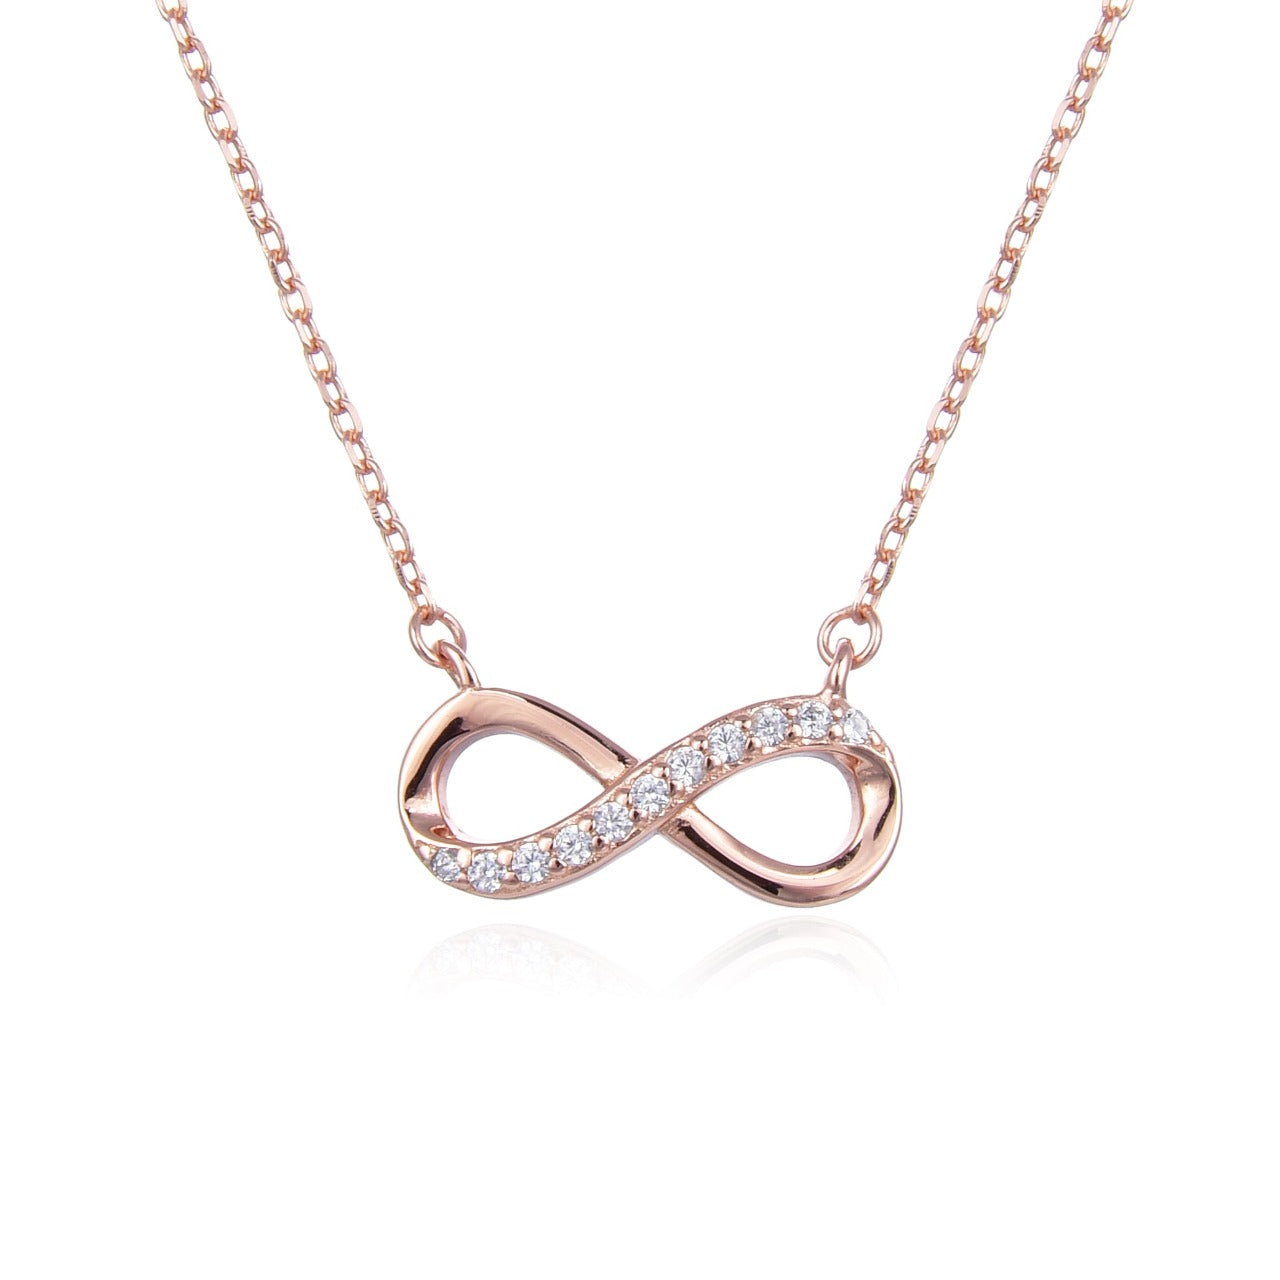 Rose Gold Infinity Necklace by Kilkenny Silver  Rose gold plated sterling silver infinity love necklace with cubic zirconia stones.